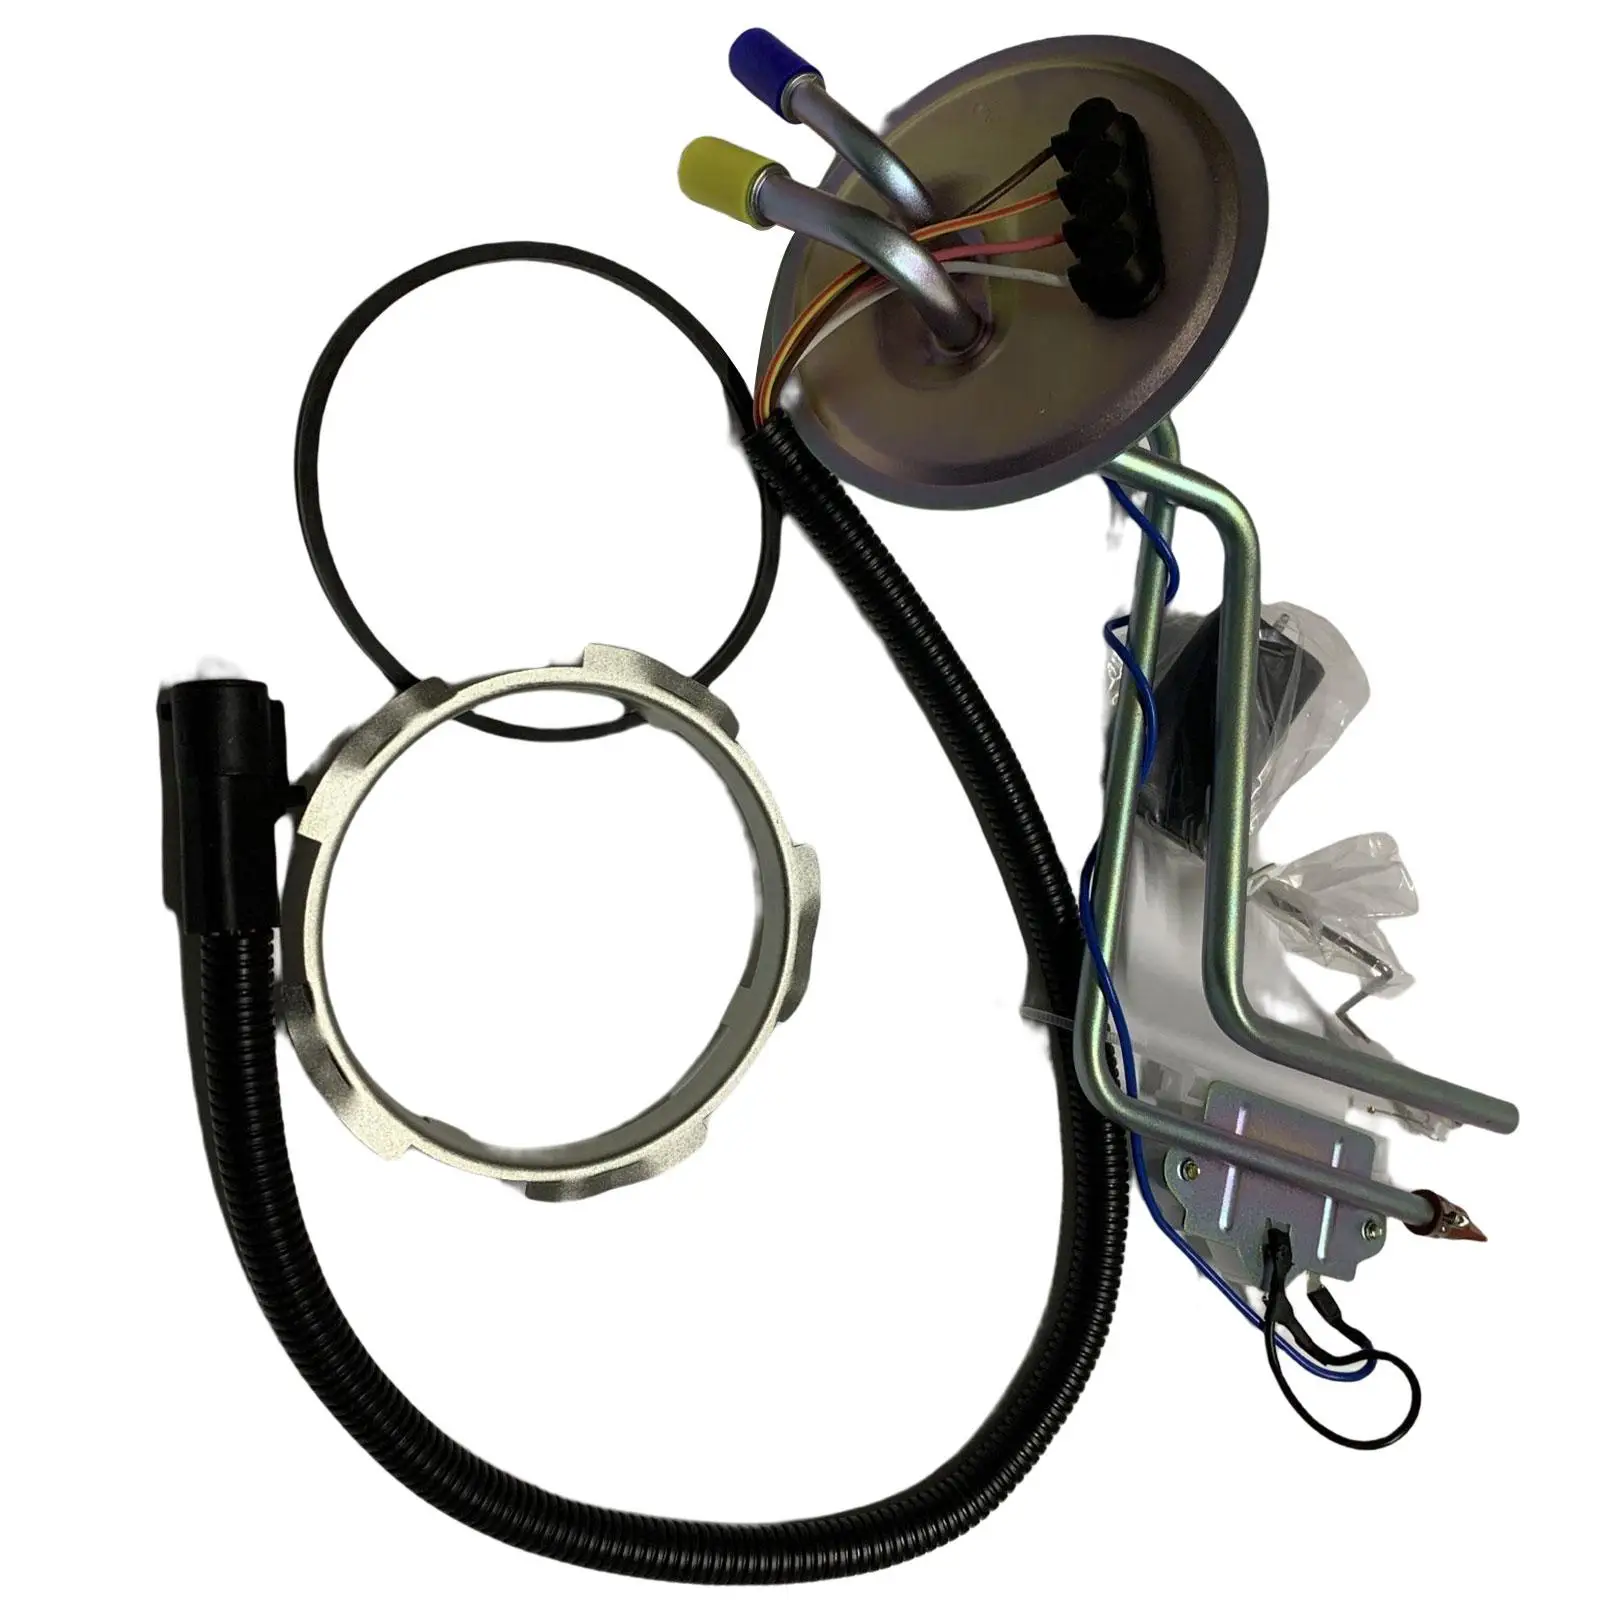 Fmsu-9Der Fuel Tank Sending Unit Replaces Parts for Ford F250 F350 1994 1995 1996 1997 High Performance Easy Installation